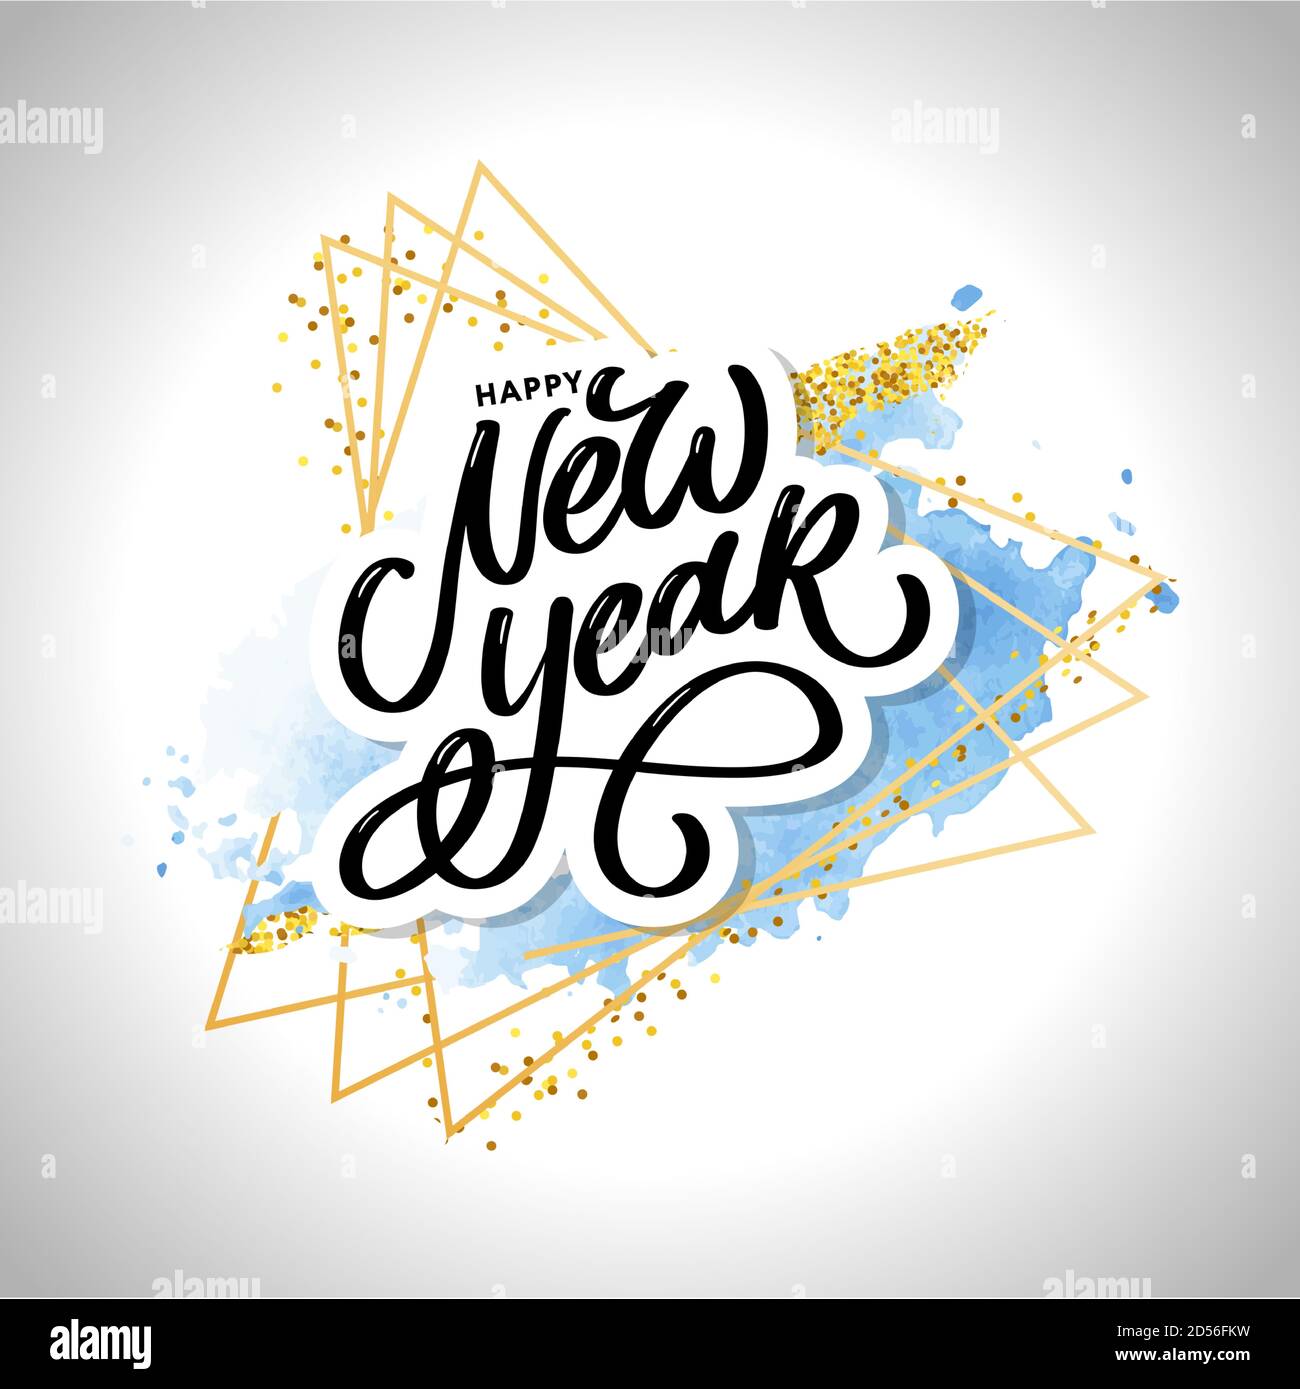 Happy New Year 2021 Beautiful greeting card poster with calligraphy black text word gold fireworks. Hand drawn design elements. Handwritten modern Stock Vector